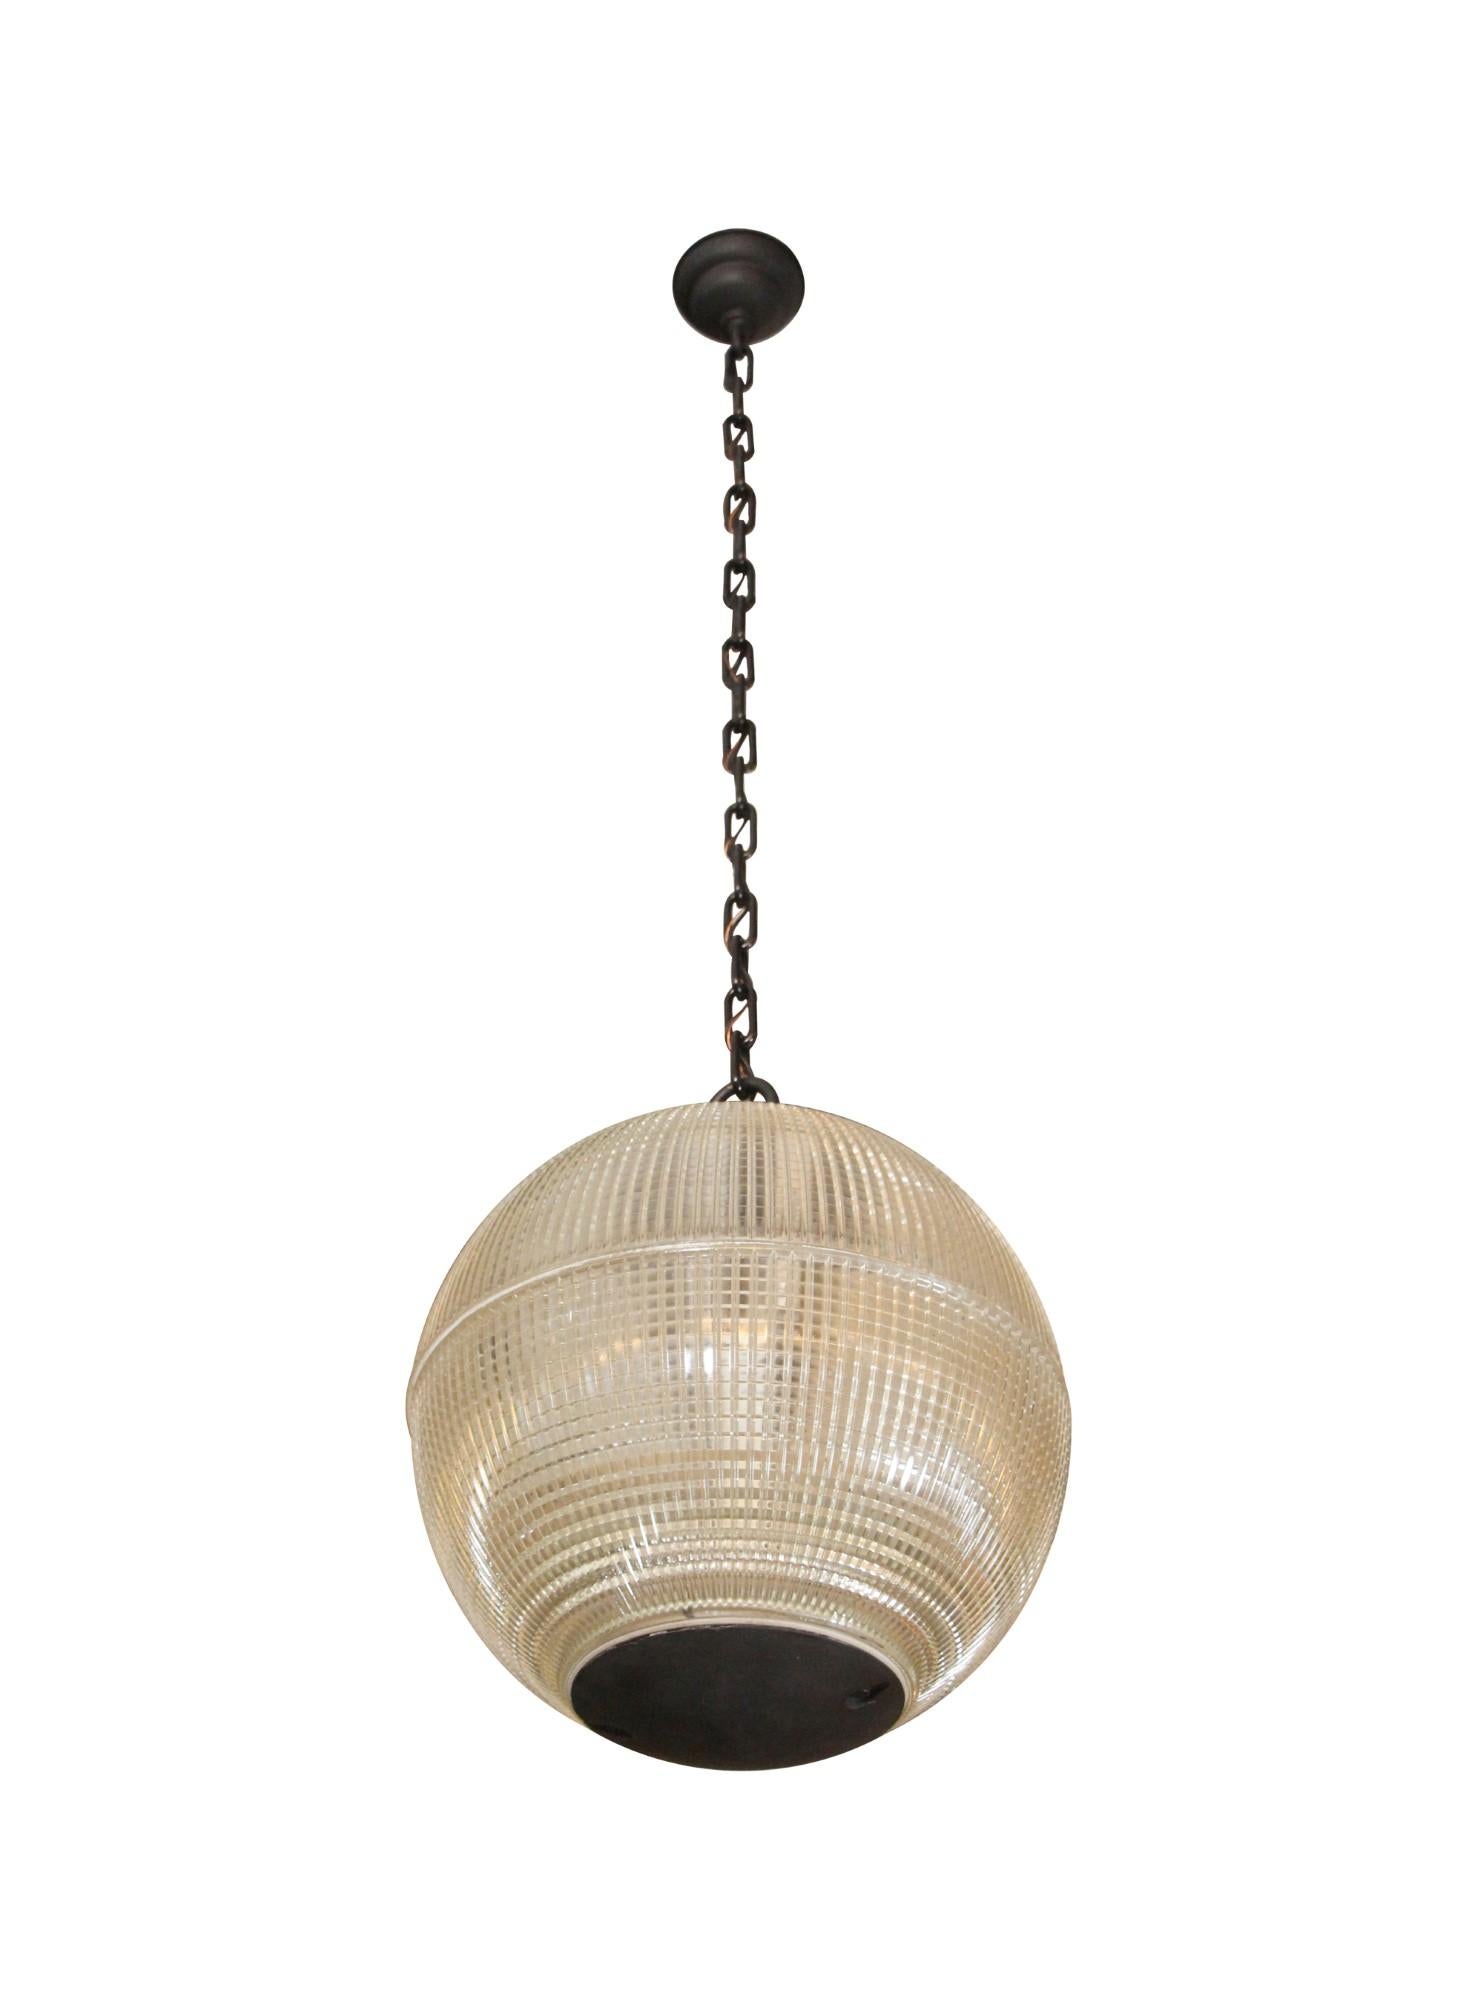 Industrial 1960s Paris Holophane Globe Street Pendant Light Qty Available For Sale